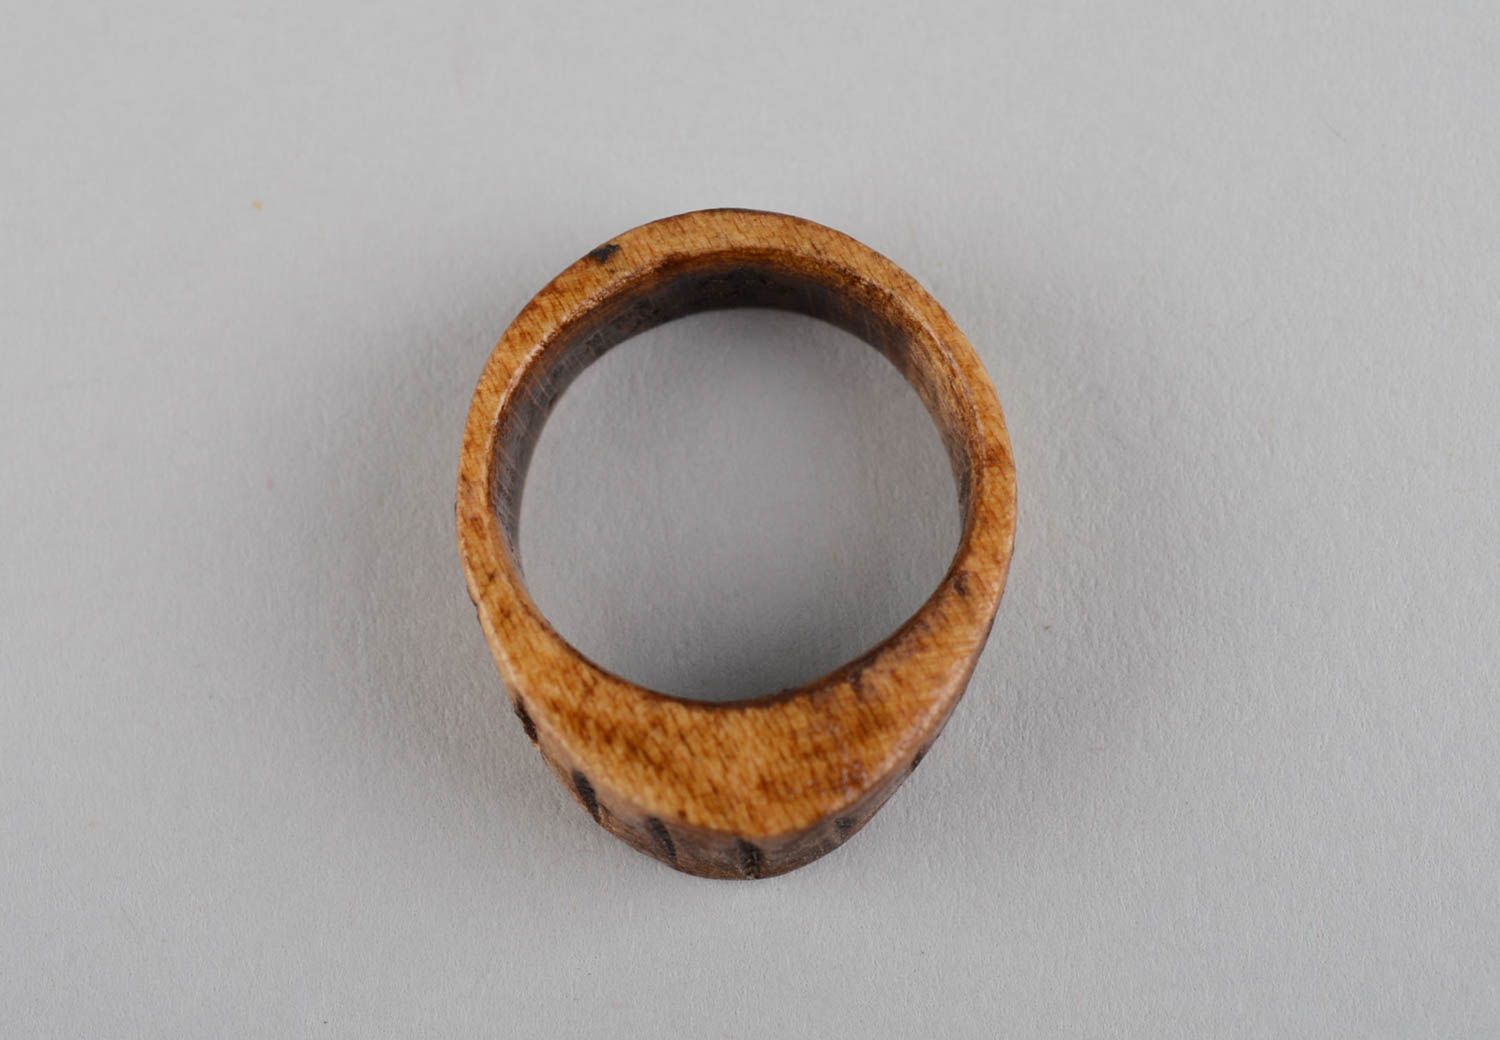 Unusual handmade wooden ring fashion accessories wood craft gifts for her photo 8